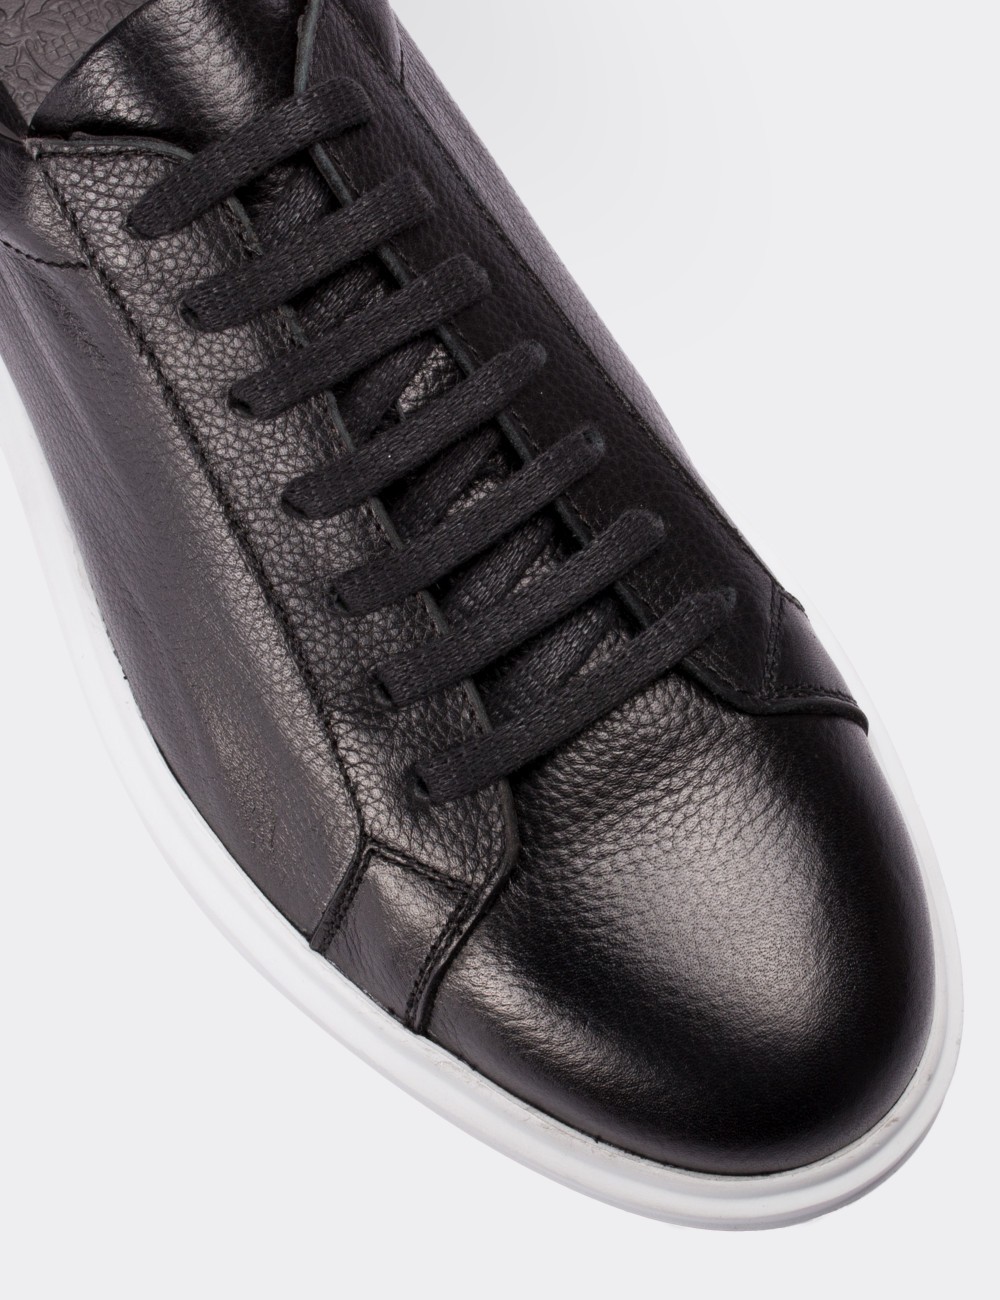 Black  Leather Lace-up Shoes - 01673MSYHP02